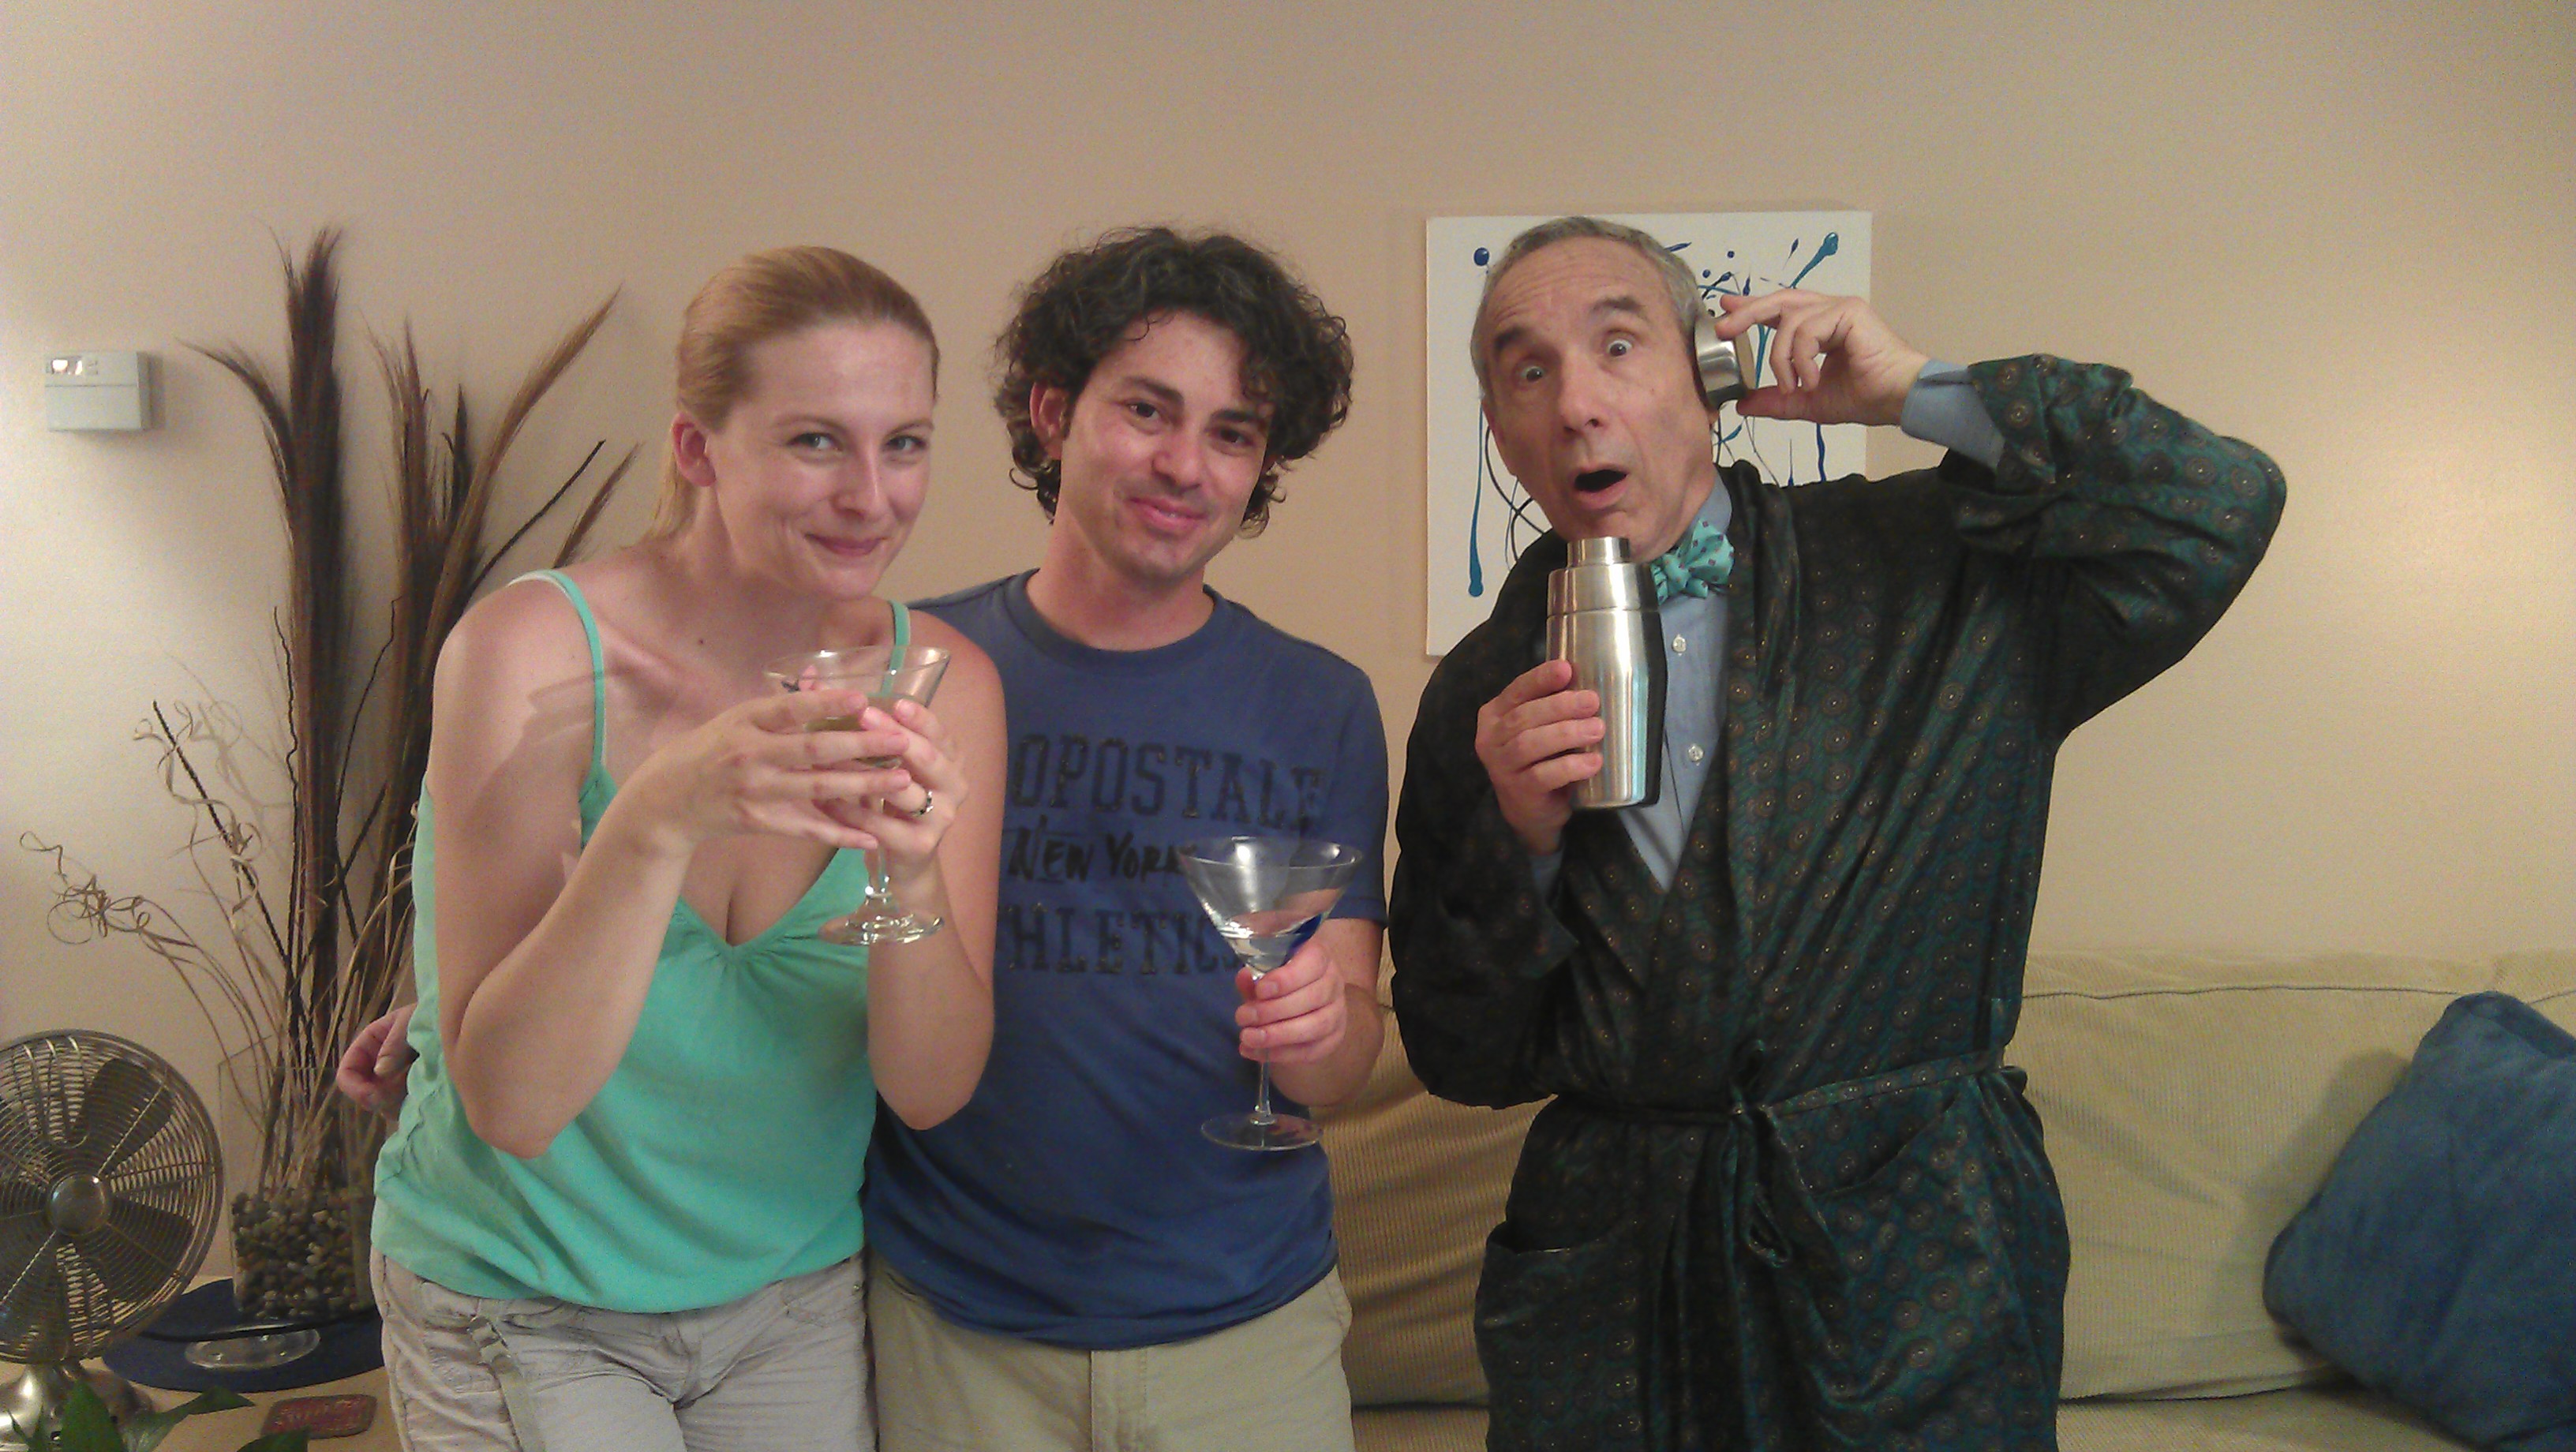 The Marlowes with Lloyd Kaufman in 